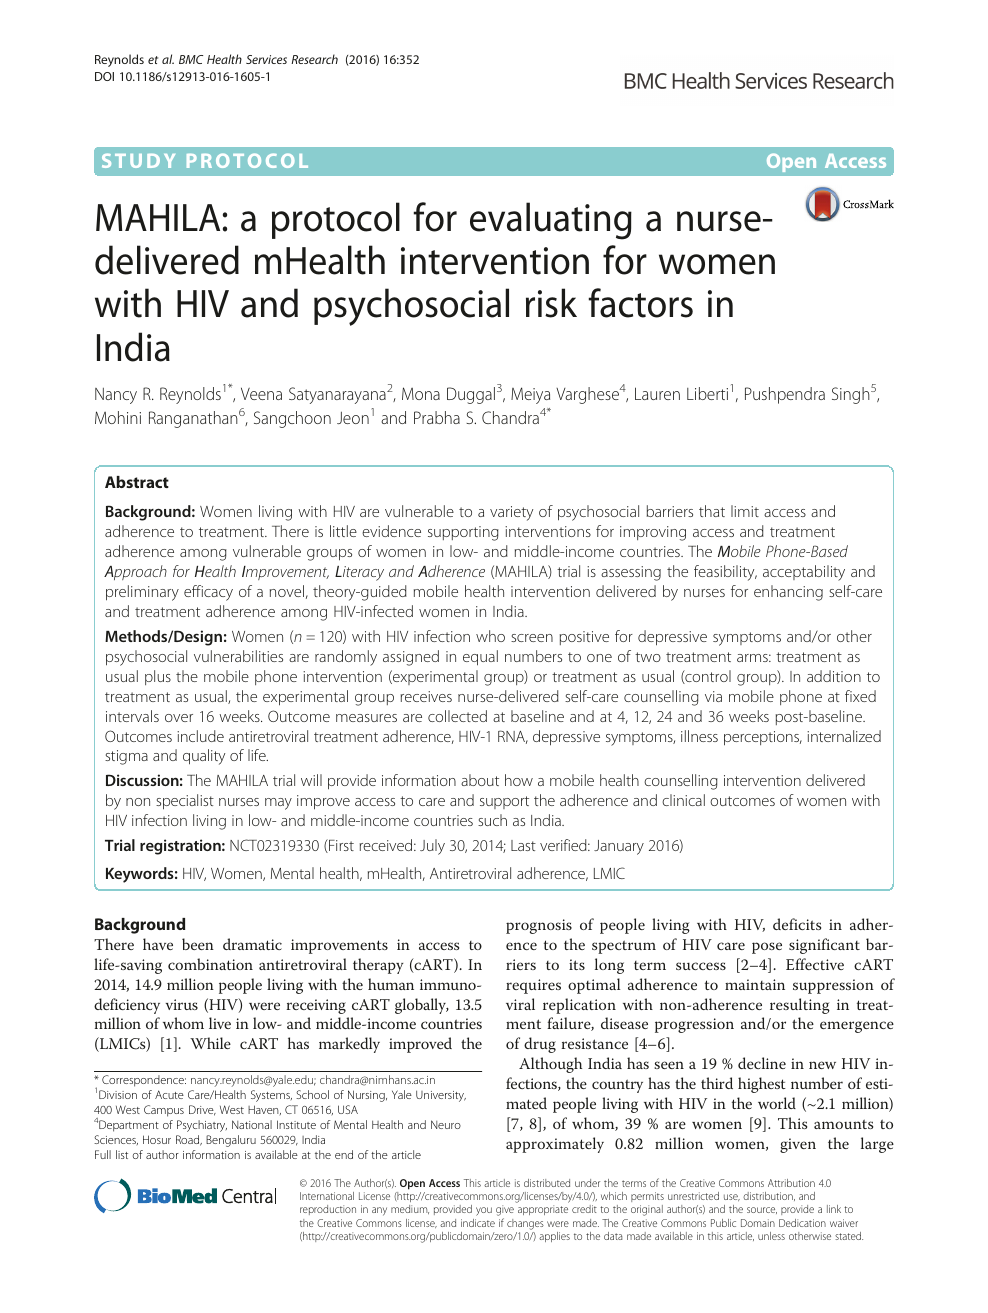 Mahila A Protocol For Evaluating A Nurse Delivered Mhealth Intervention For Women With Hiv And Psychosocial Risk Factors In India Topic Of Research Paper In Psychology Download Scholarly Article Pdf And Read